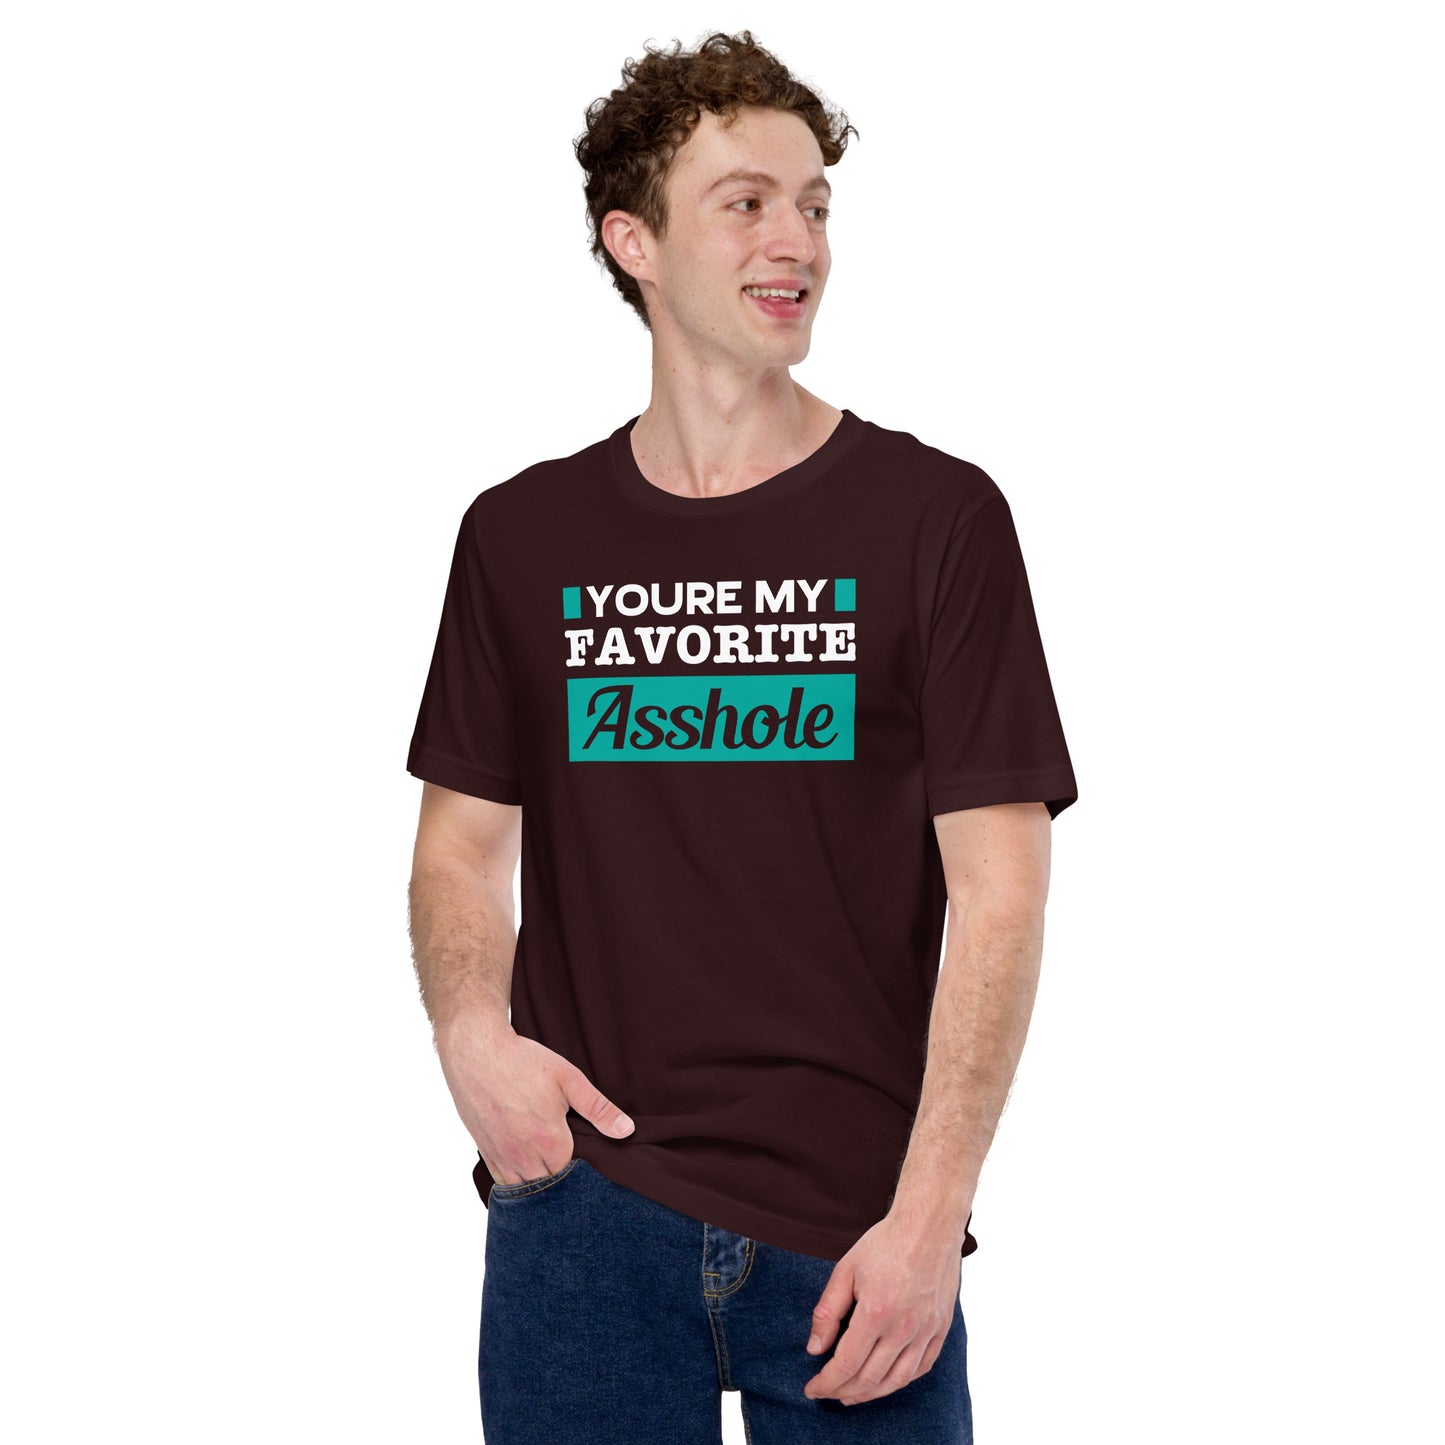 You are my Favorite Asshole Unisex t-shirt